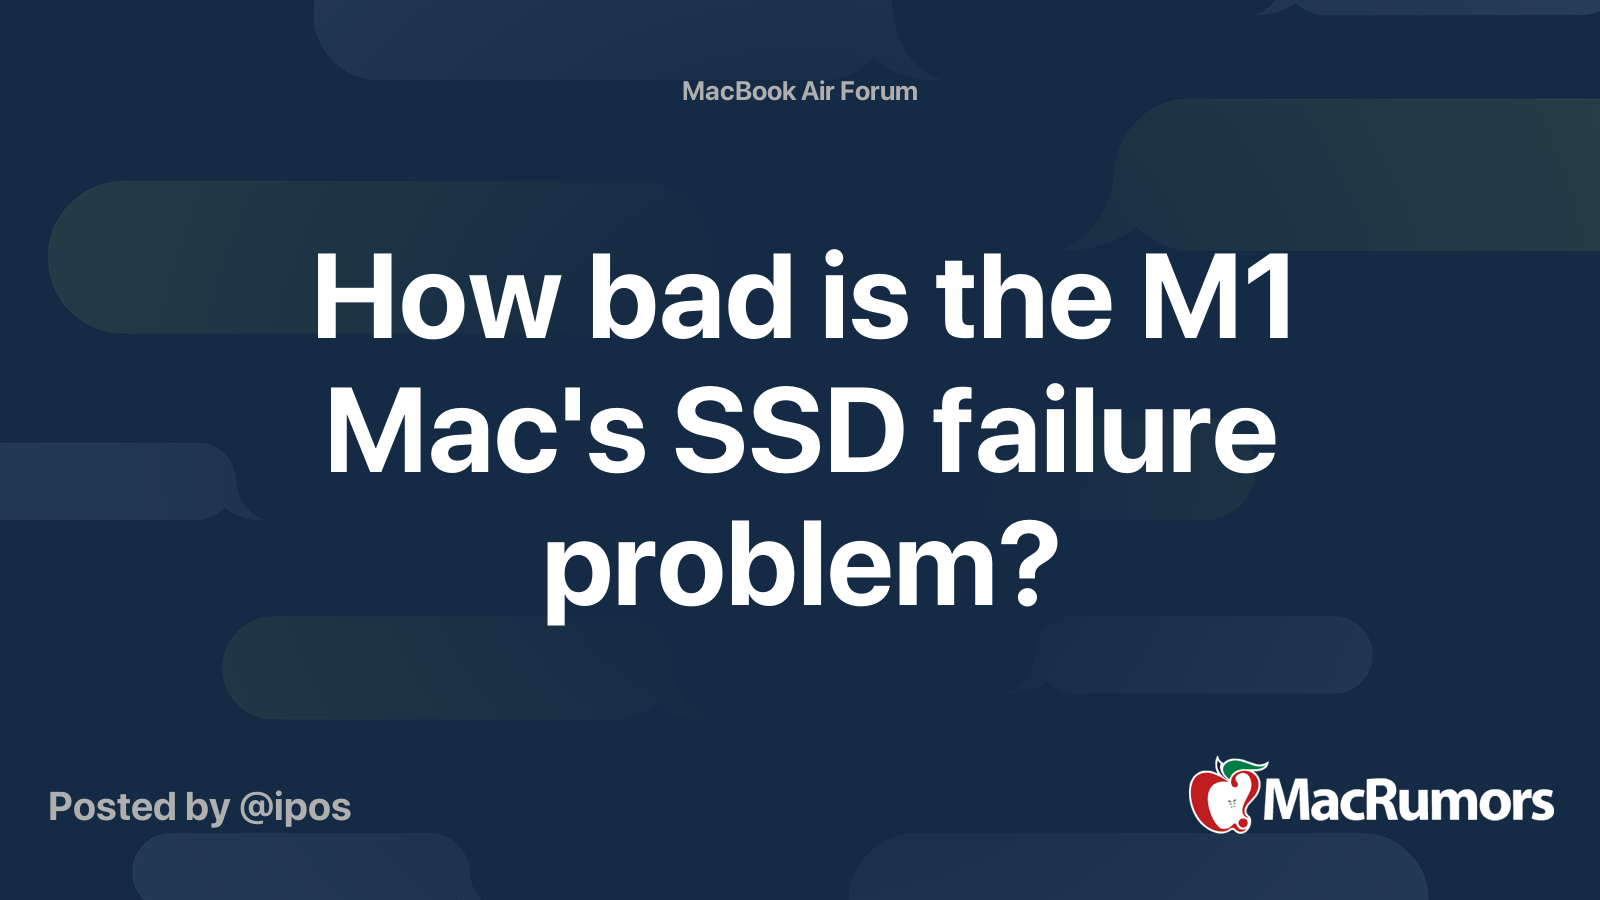 overdrive Indflydelse web How bad is the M1 Mac's SSD failure problem? | MacRumors Forums